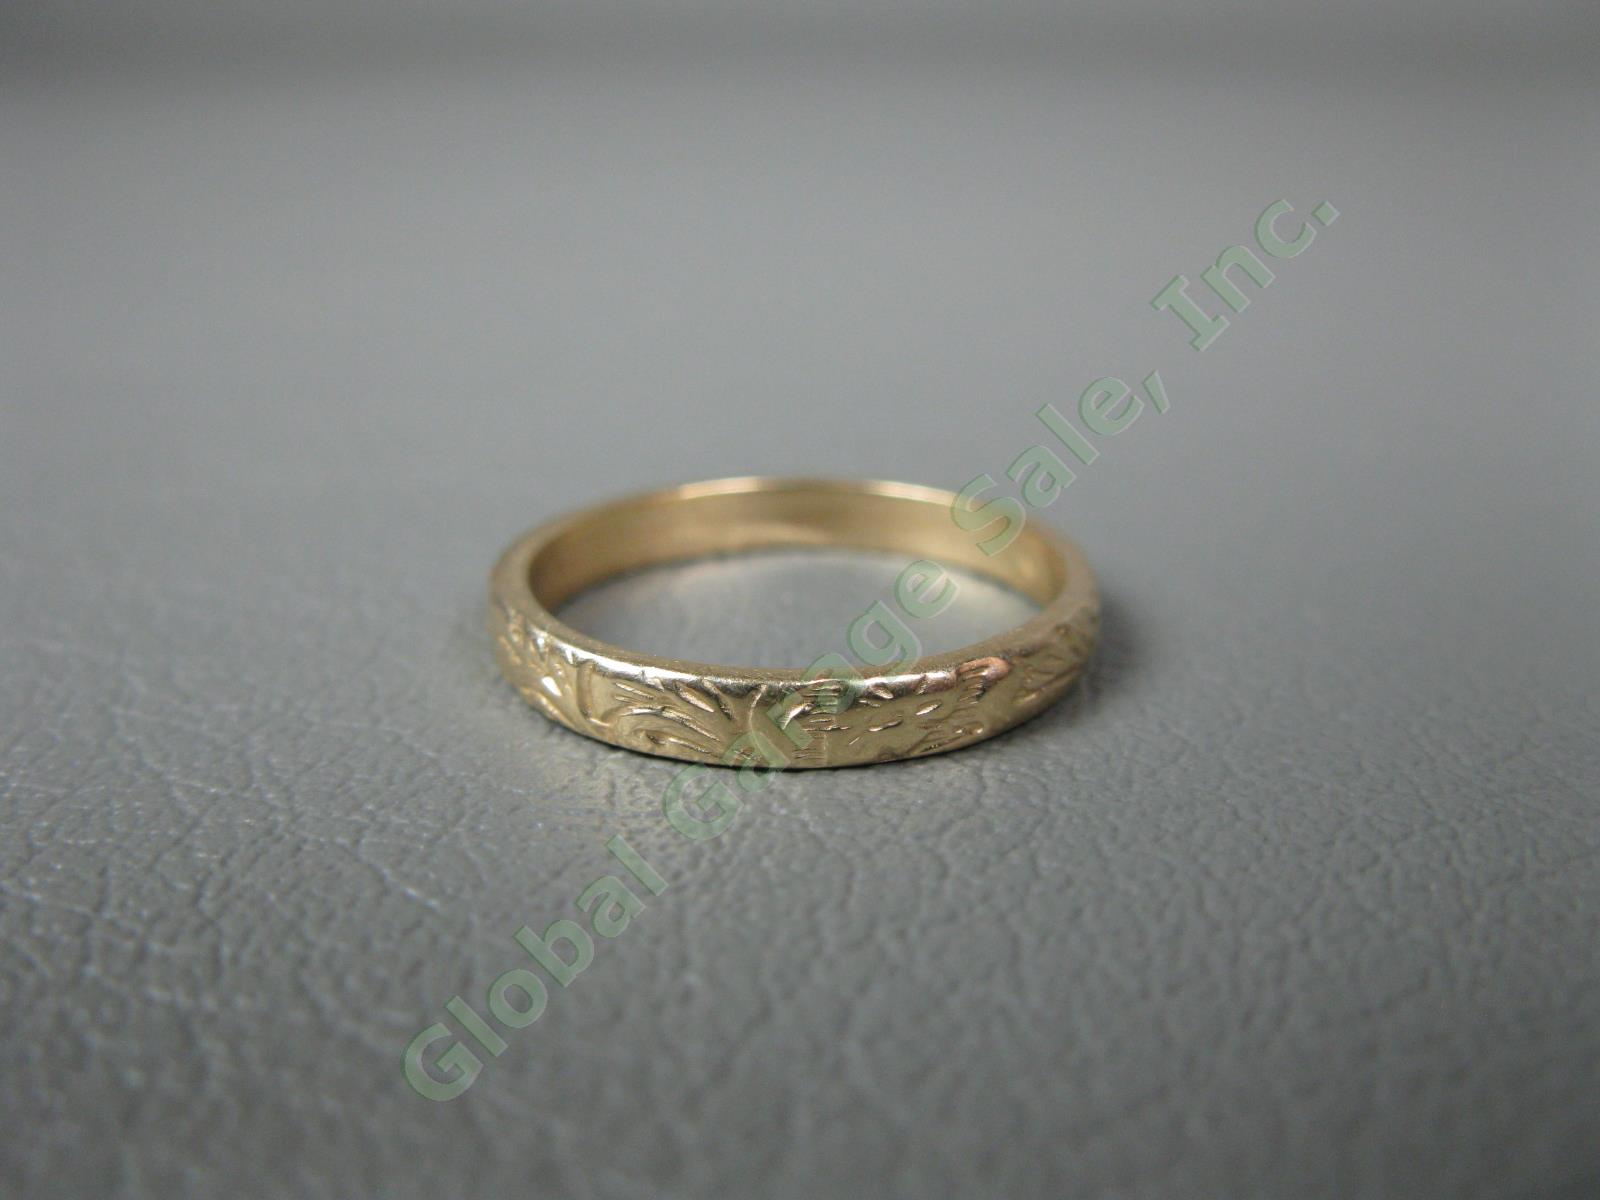 14K Solid Yellow Gold Size 7-1/4 Engraved Mens Gents Wedding Band Ring 2.6 Grams